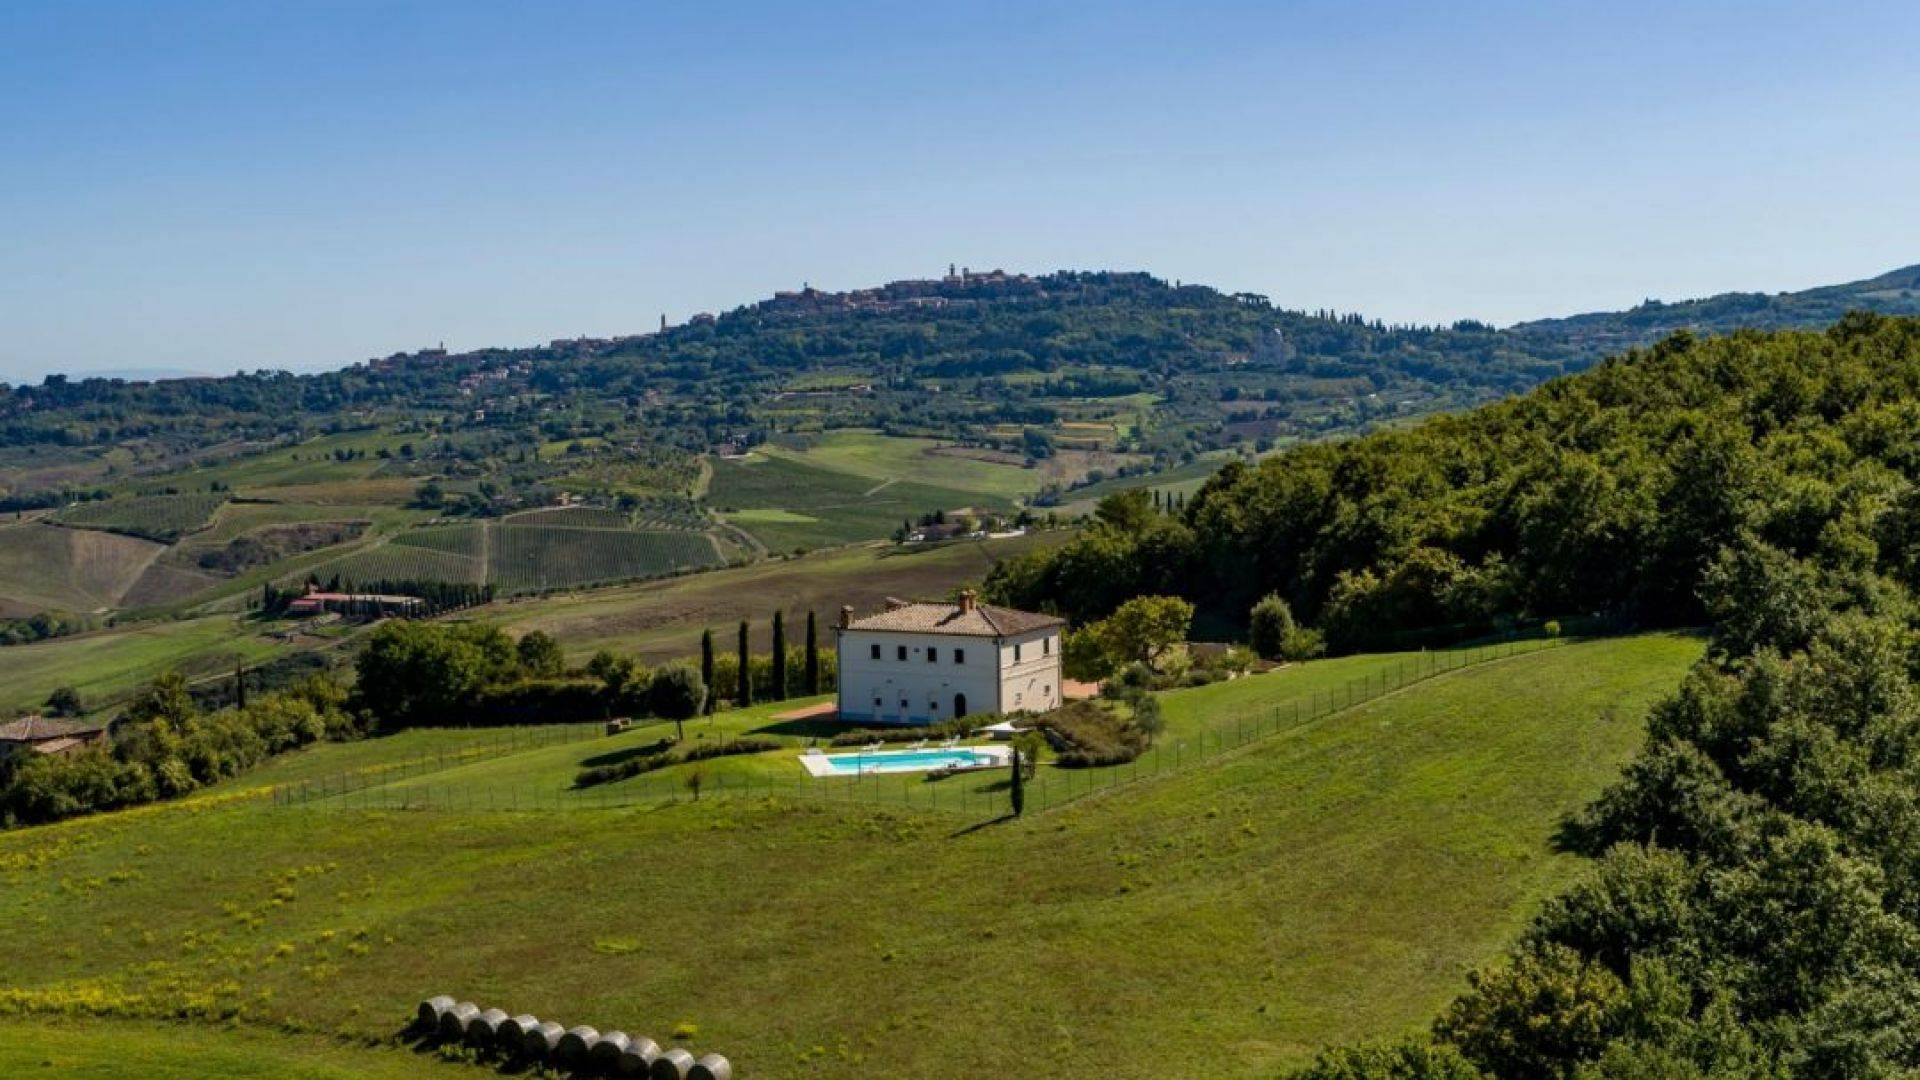 Villa with swimming pool located in a panoramic position, (located in the municipality of Montepulciano but only 9 km from that of Pienza).